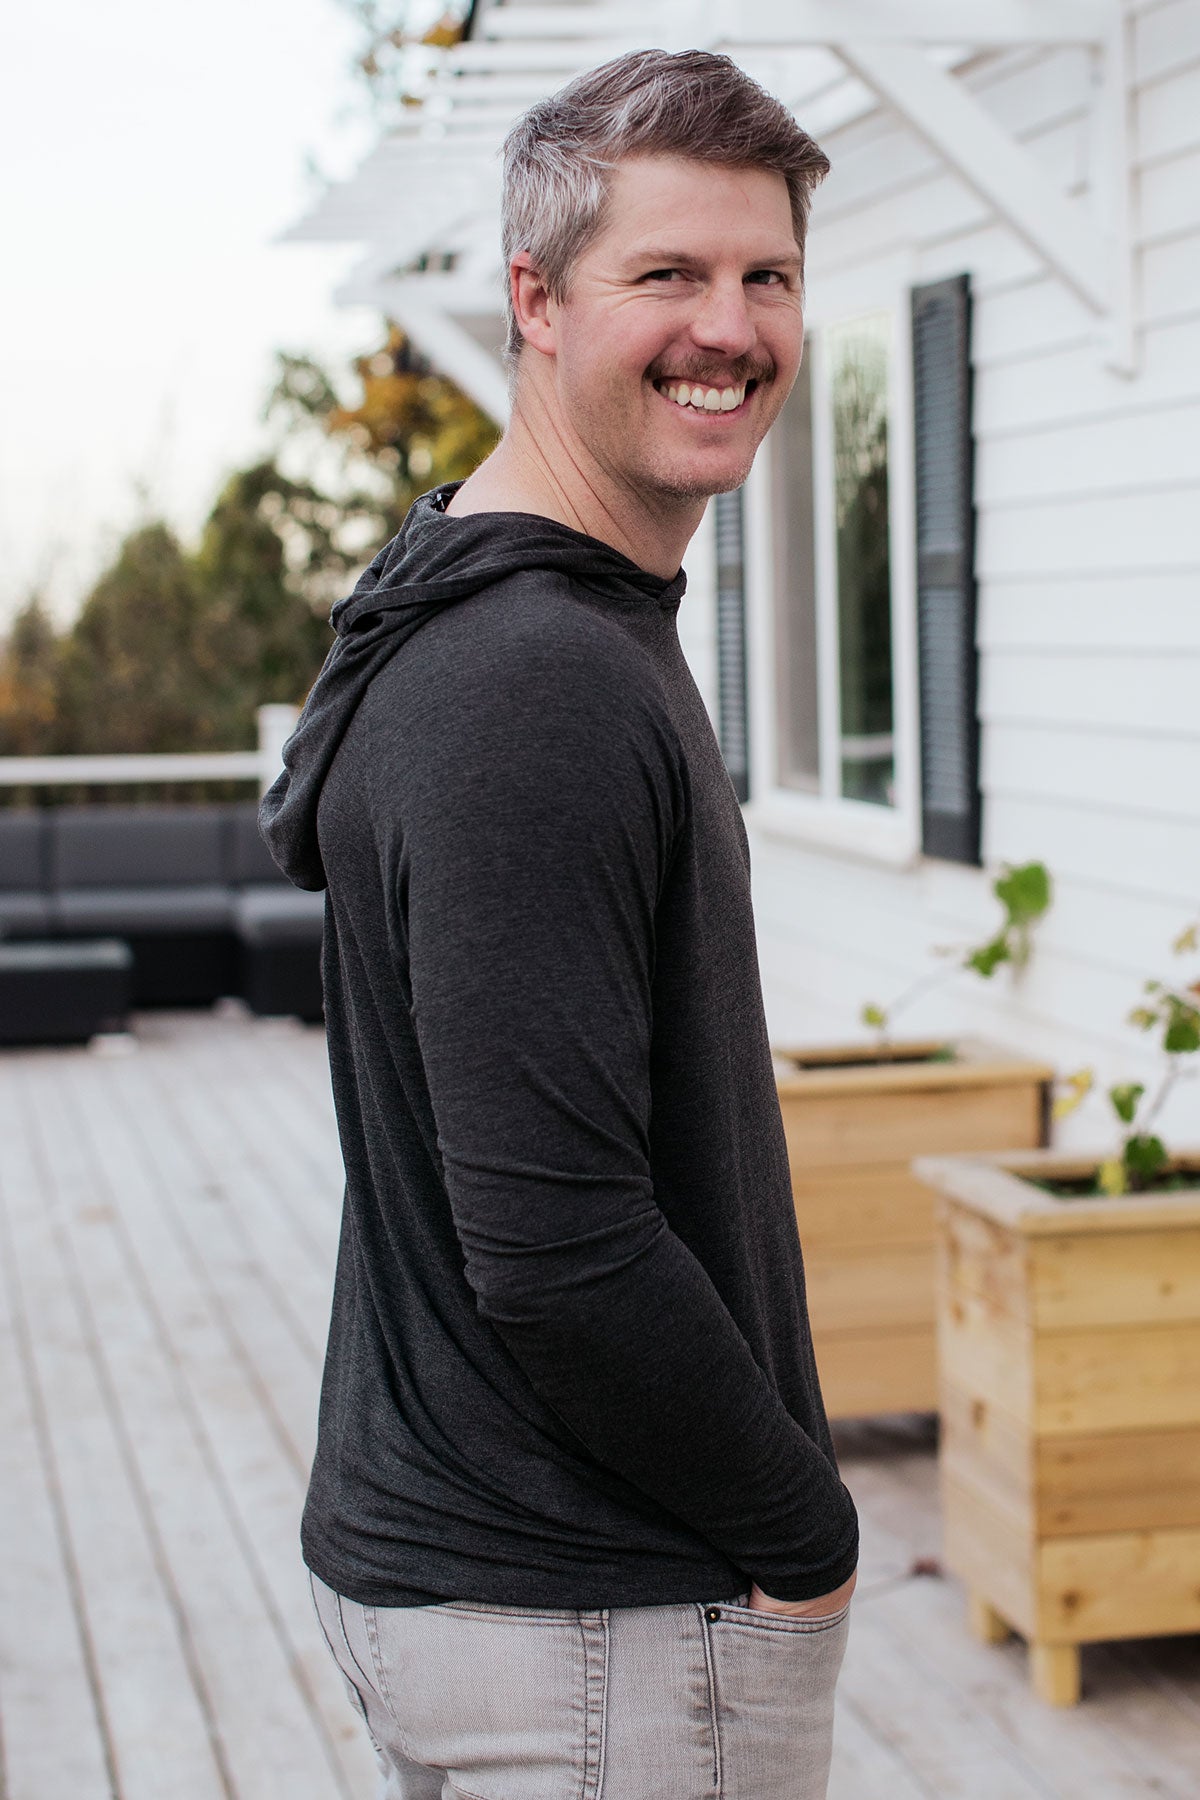 A man standing facing sideways and smiling towards the camera with both hands in his pockets, wearing Yala Travis Men's Hooded Long Seeve Raglan Bamboo Tee Shirt in Charcoal Melange